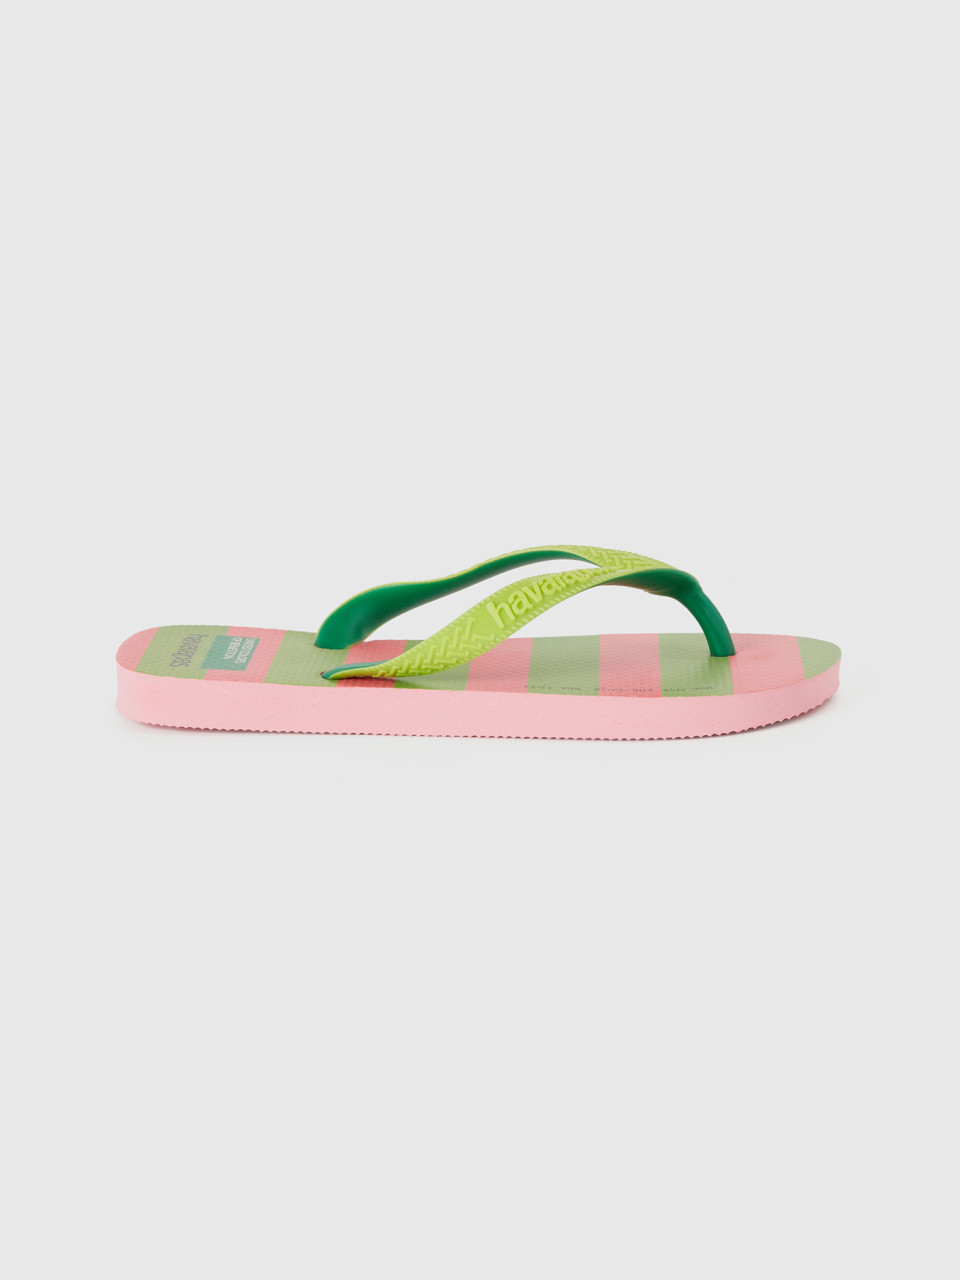 Benetton, Havaianas Flip Flops With Pink And Light Green Stripes, Multi-color, Kids